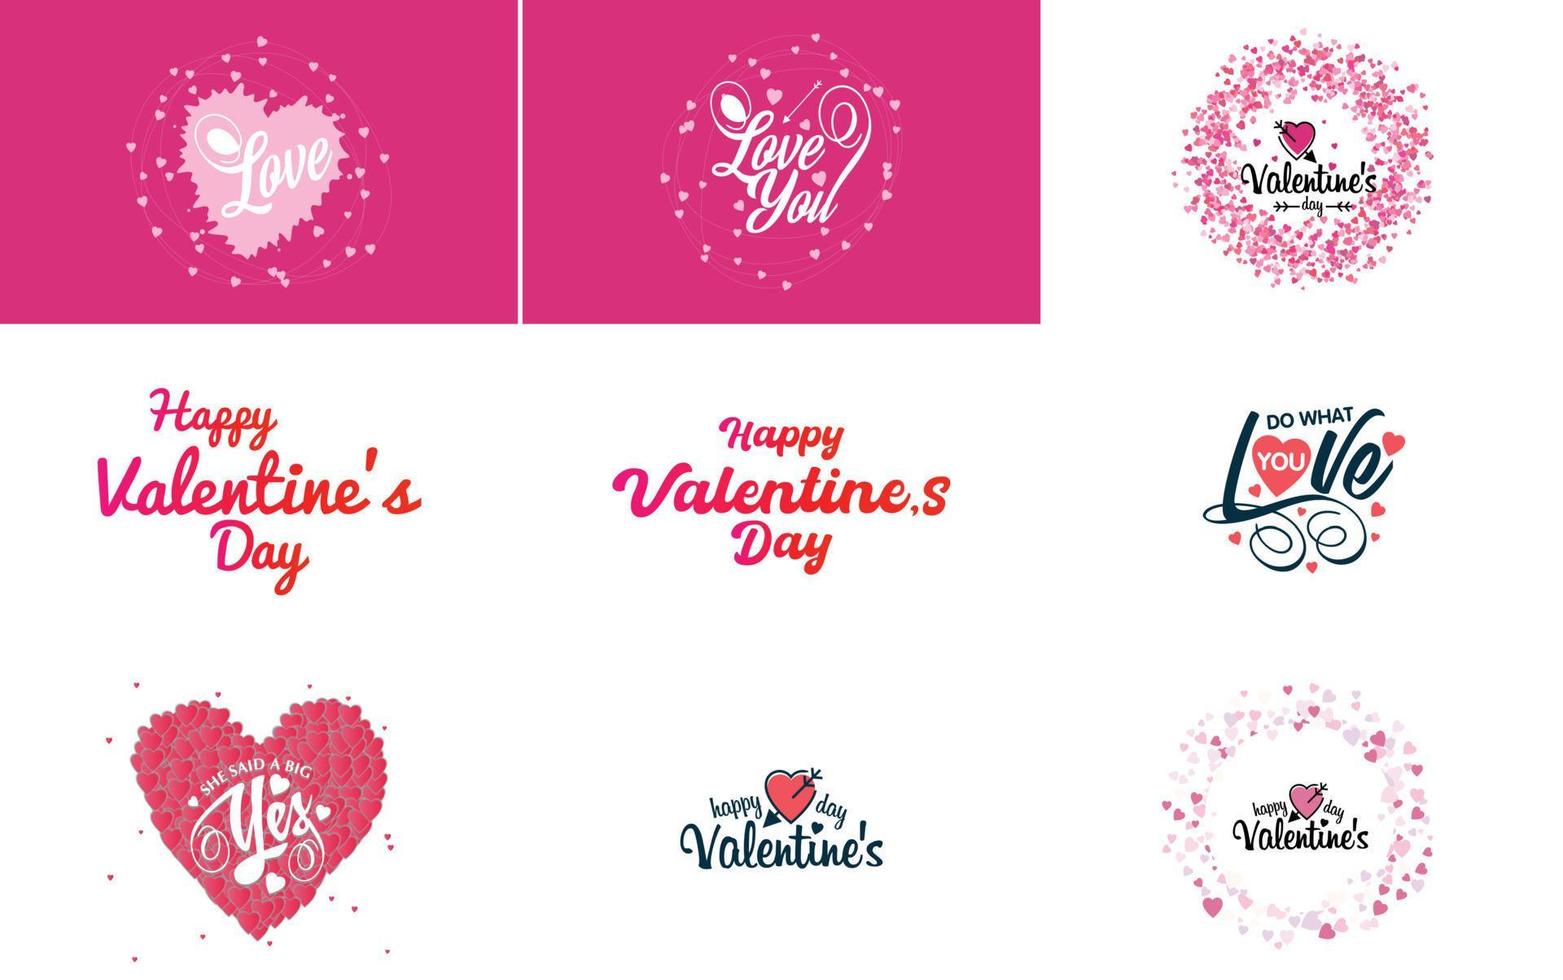 I Love You hand-drawn lettering with a heart design. suitable for use in Valentine's Day designs or as a romantic greeting vector